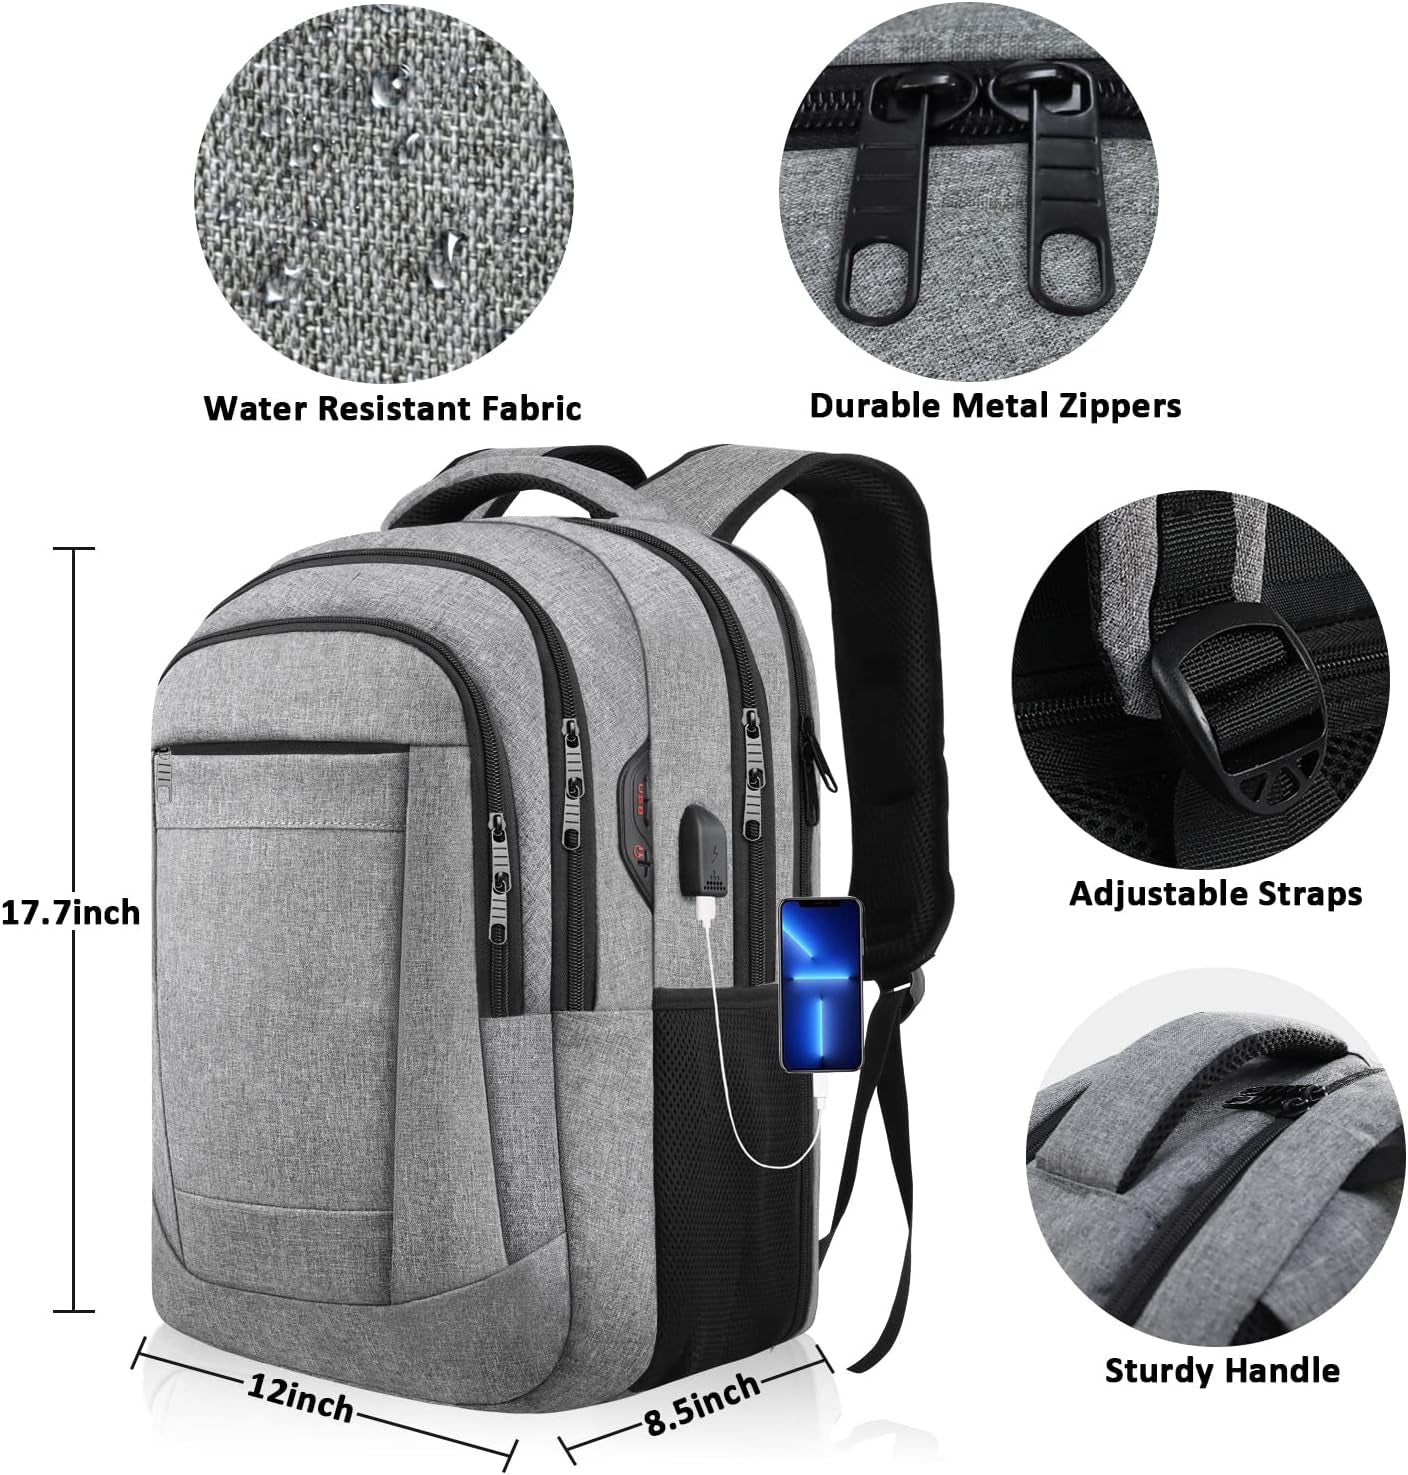 TSA Approved Large Travel Backpack, Waterproof Anti-Theft Business College Computer Bag  Fits 15.6 Inch Laptop, USB Charging Port, Headphone Hole,- Grey